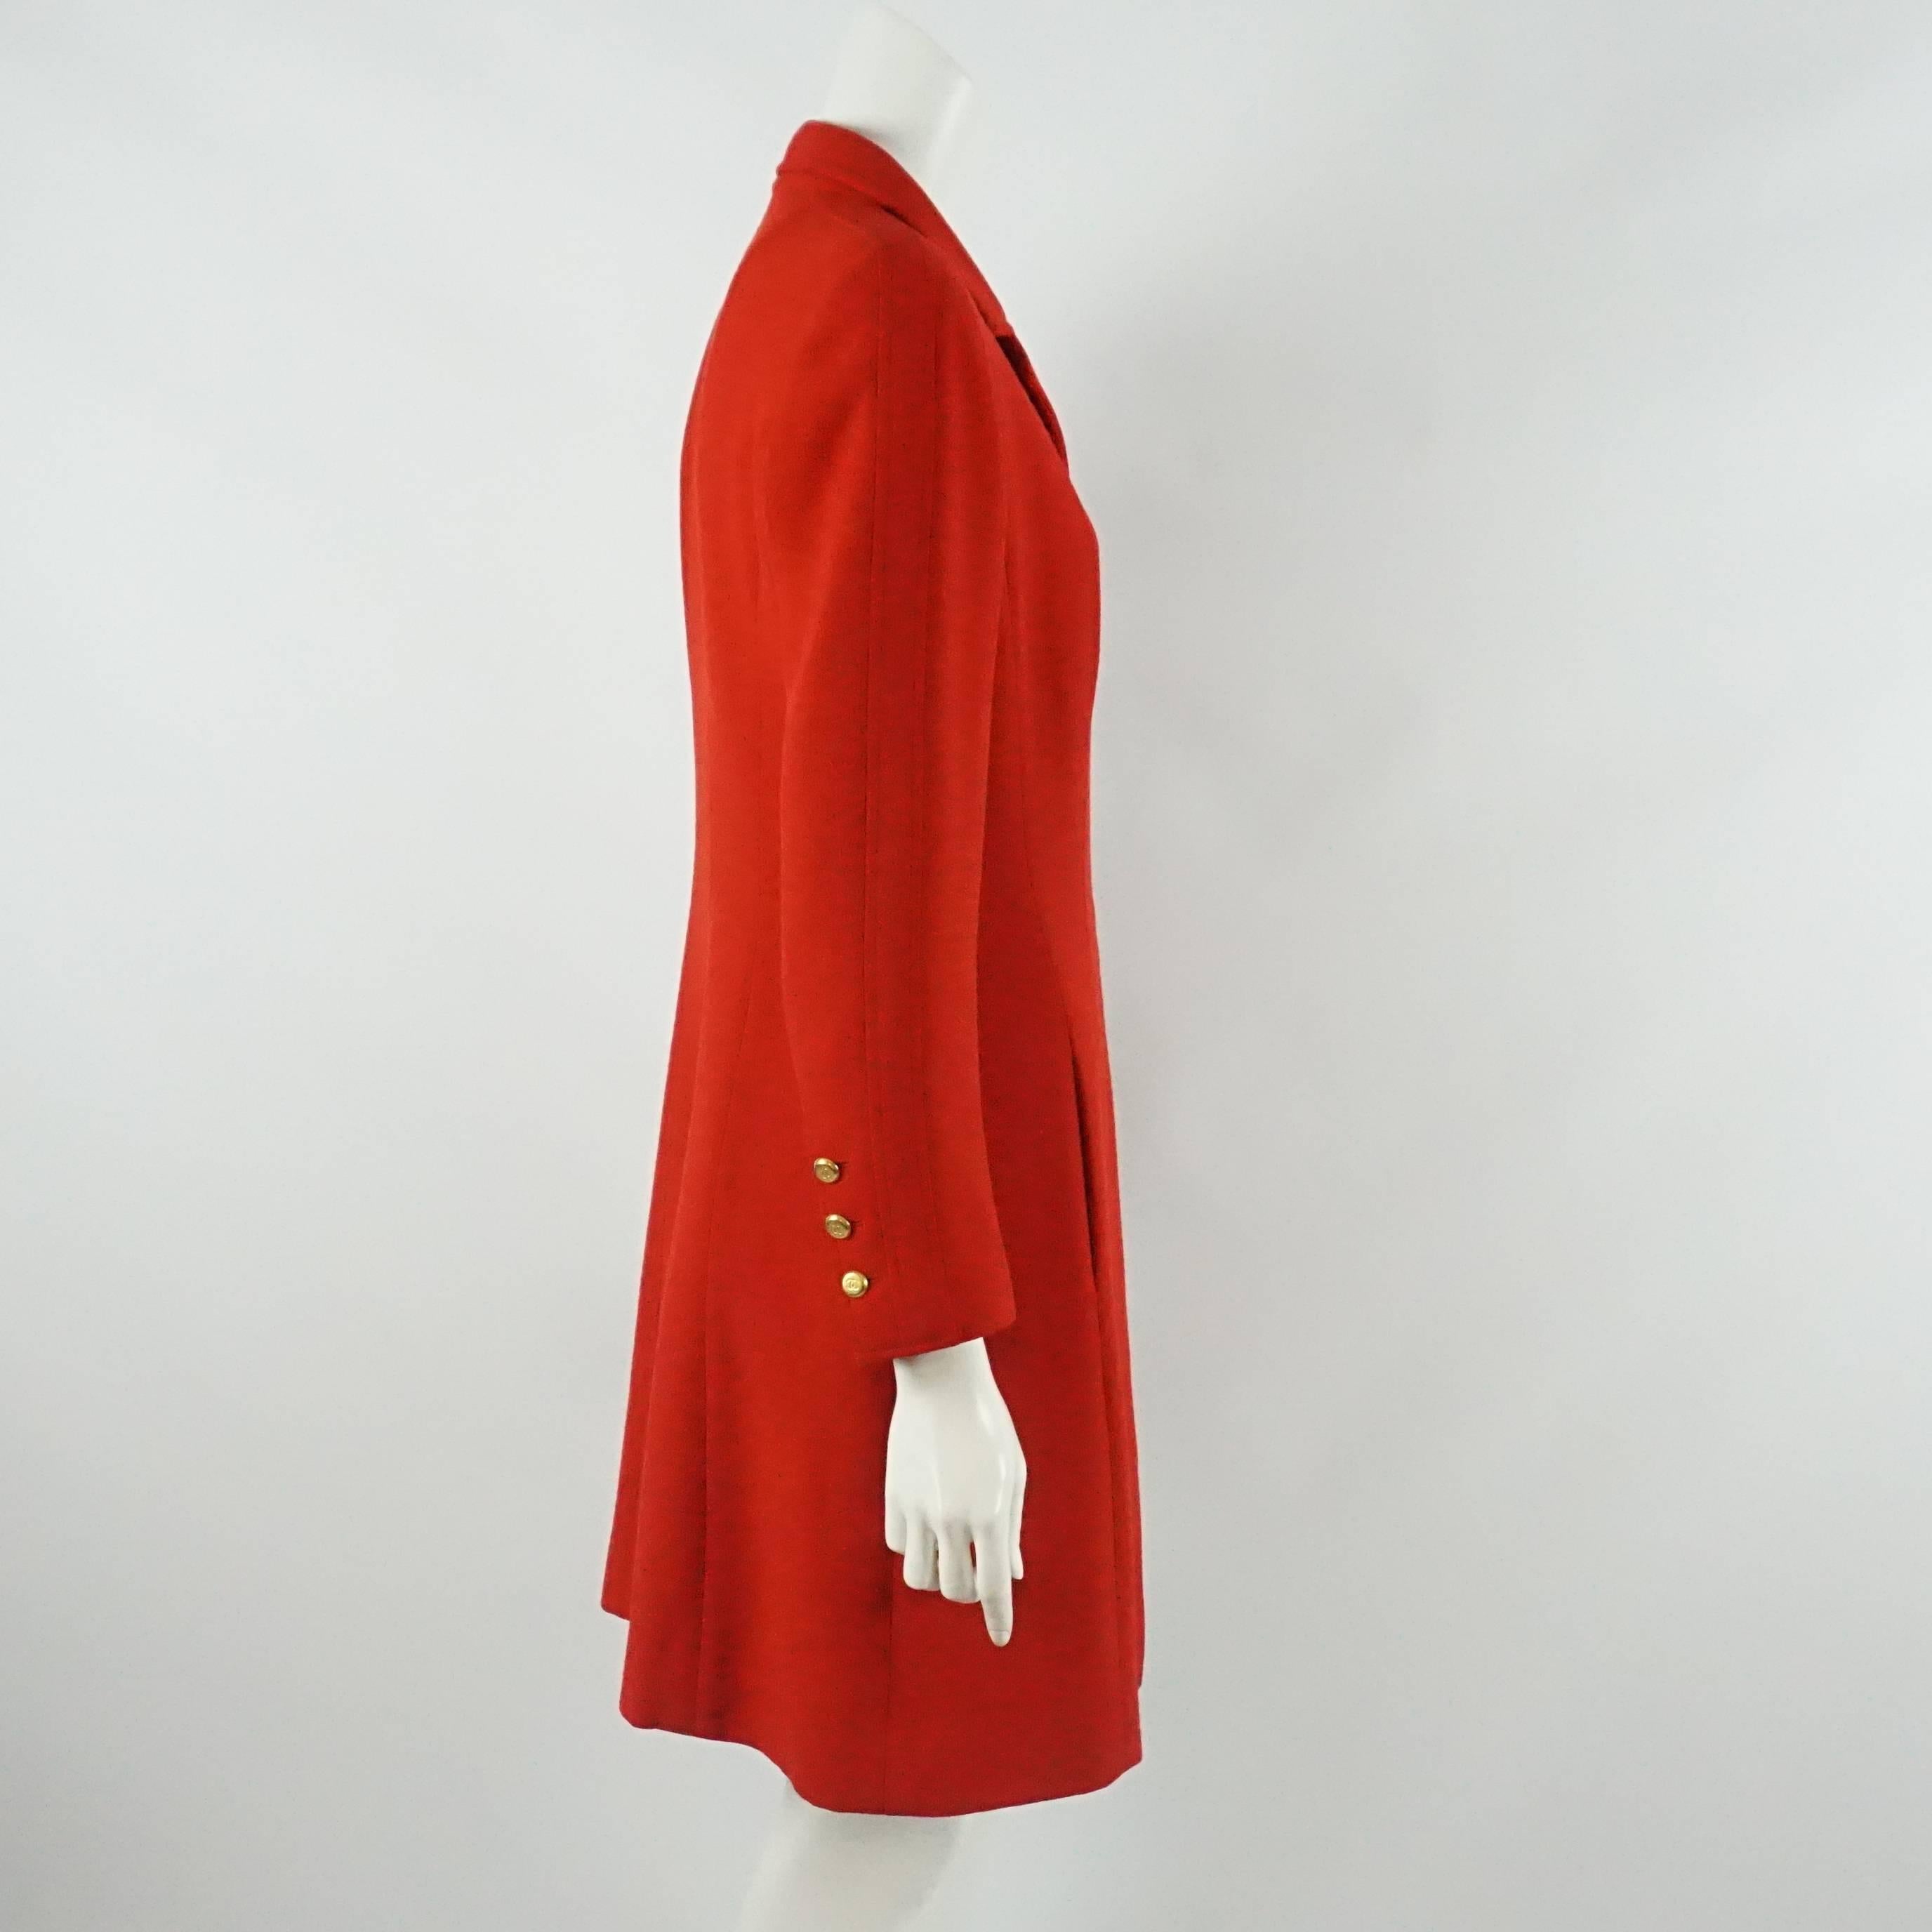 Chanel Red Double Faced Wool Coat Dress - 40 - 96A. This beautiful coat dress is red with hook and eye closures down the middle. There are 3 CC gold colored buttons on each sleeve. This dress is in very good condition vintage condition, with a very